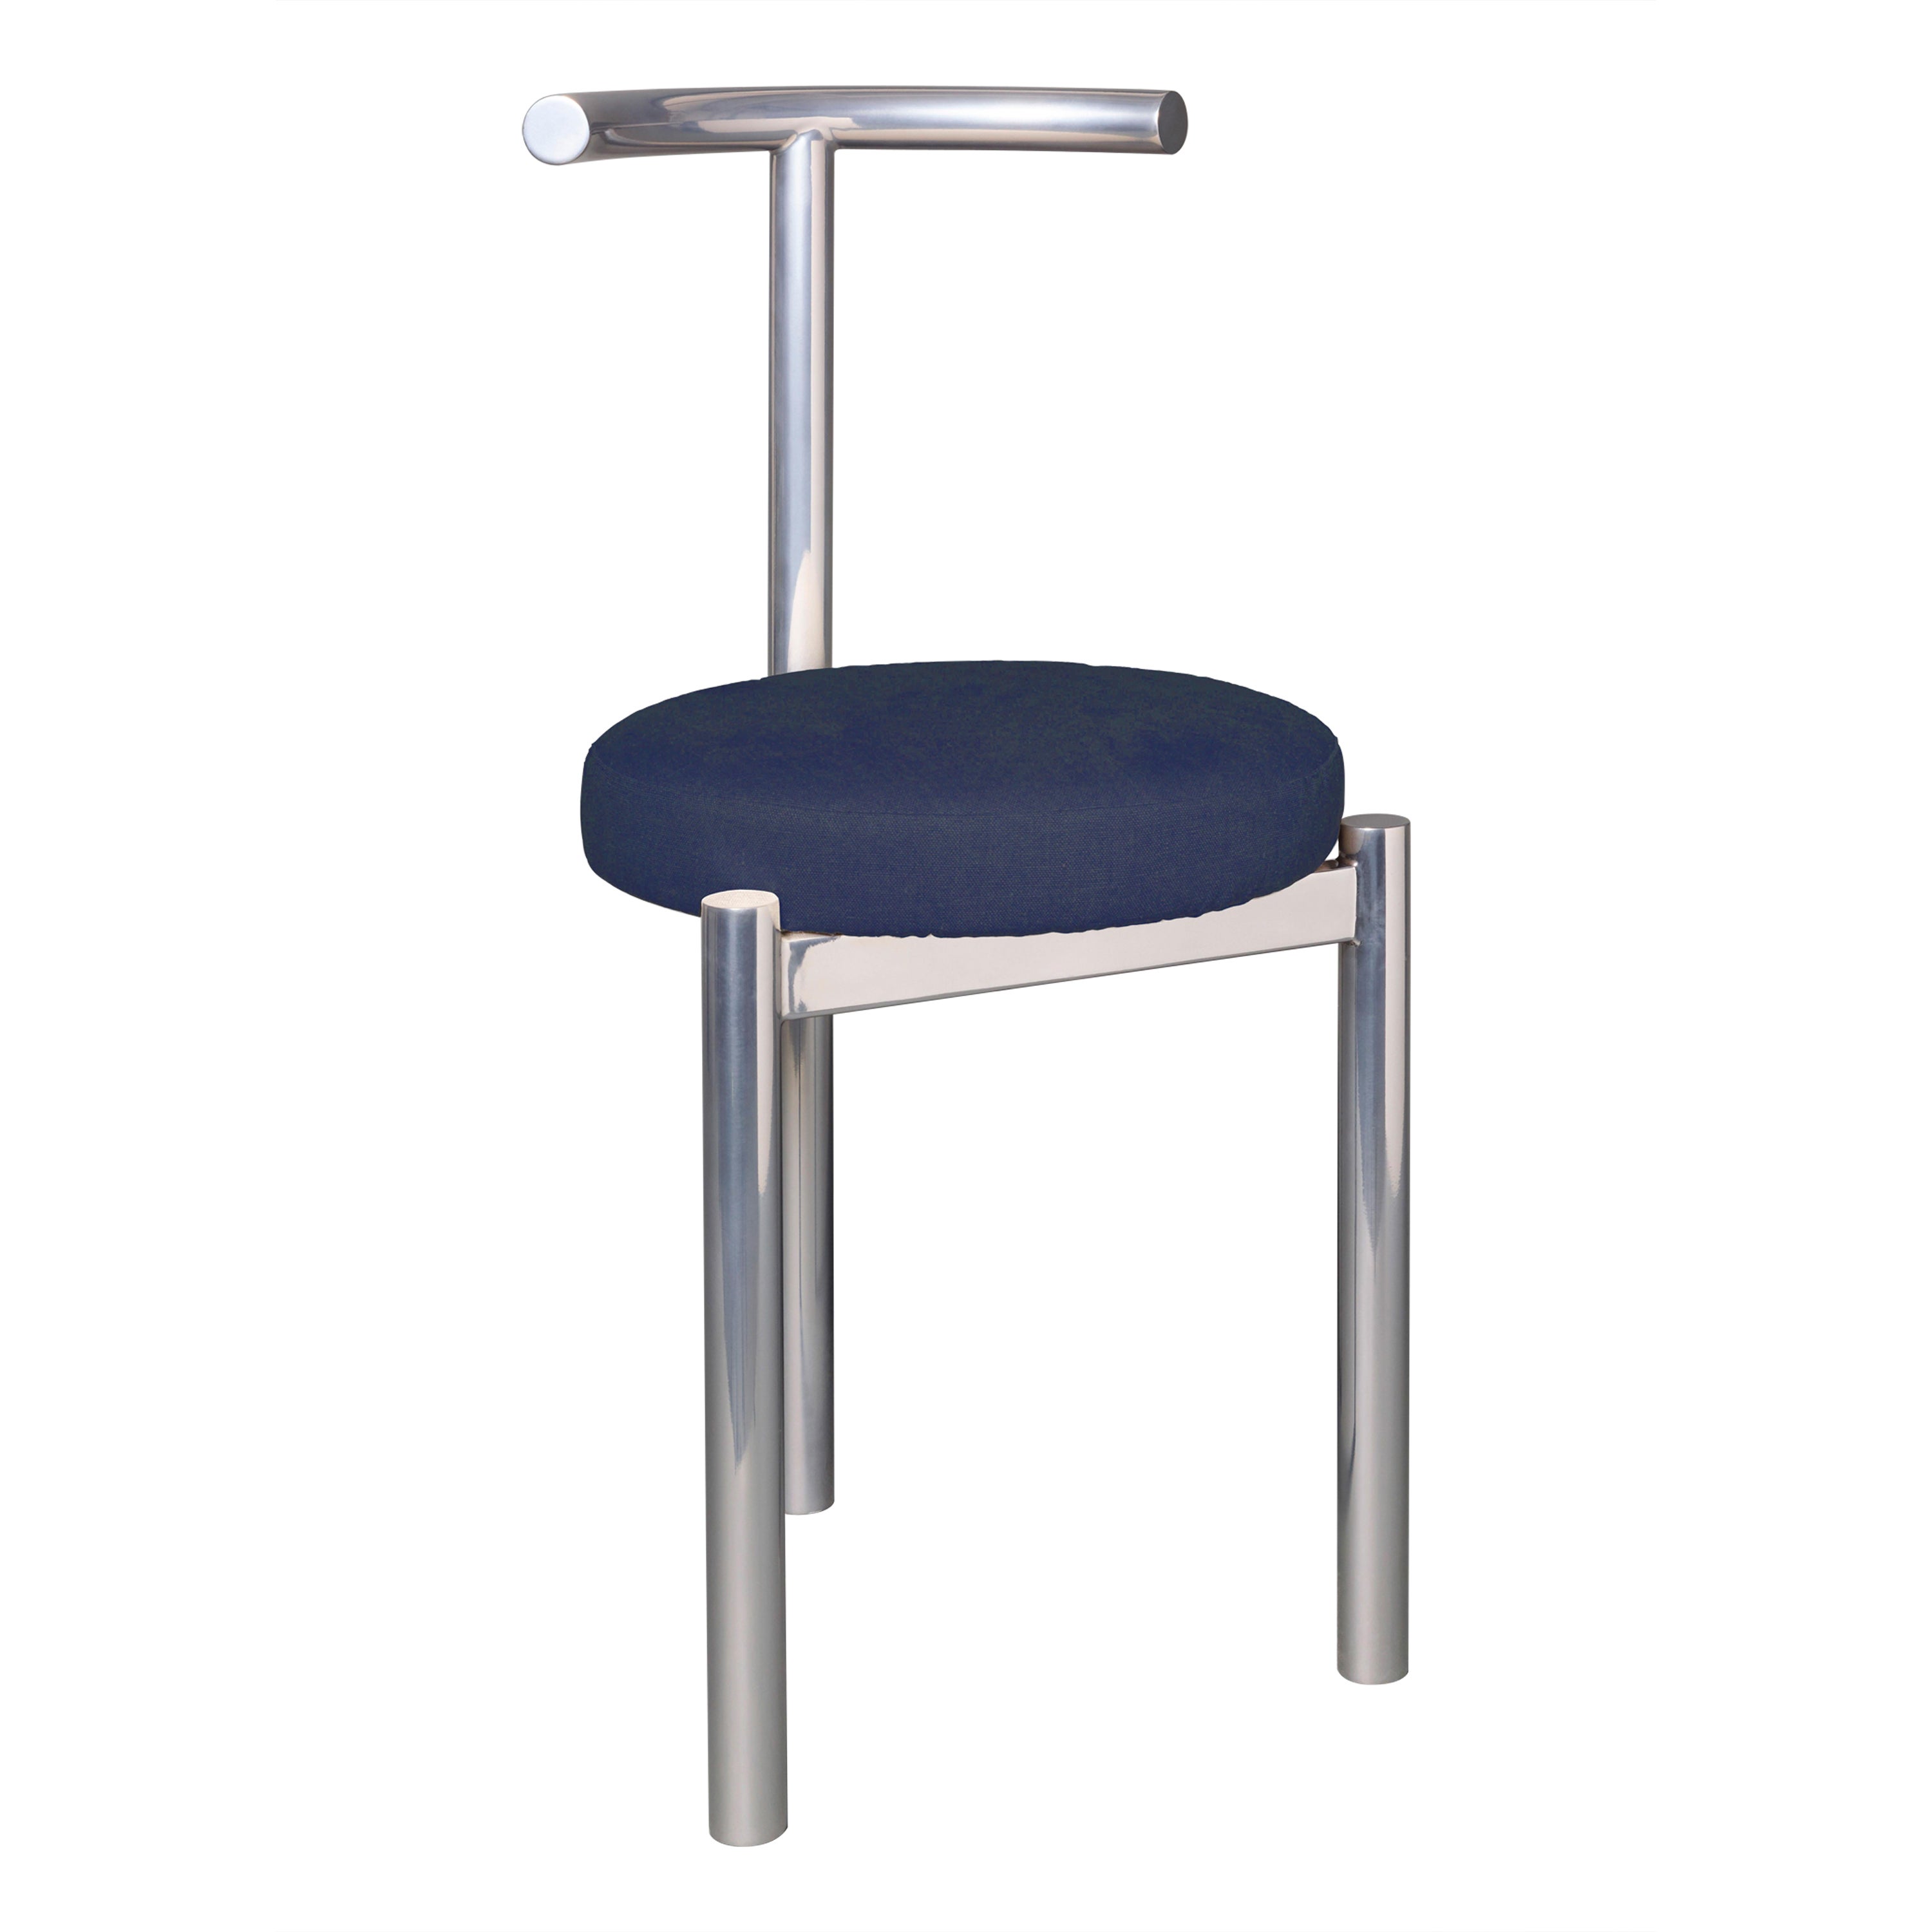 'M Series' Tubular Polished Stainless Steel Chair, Navy Fabric Seat For Sale